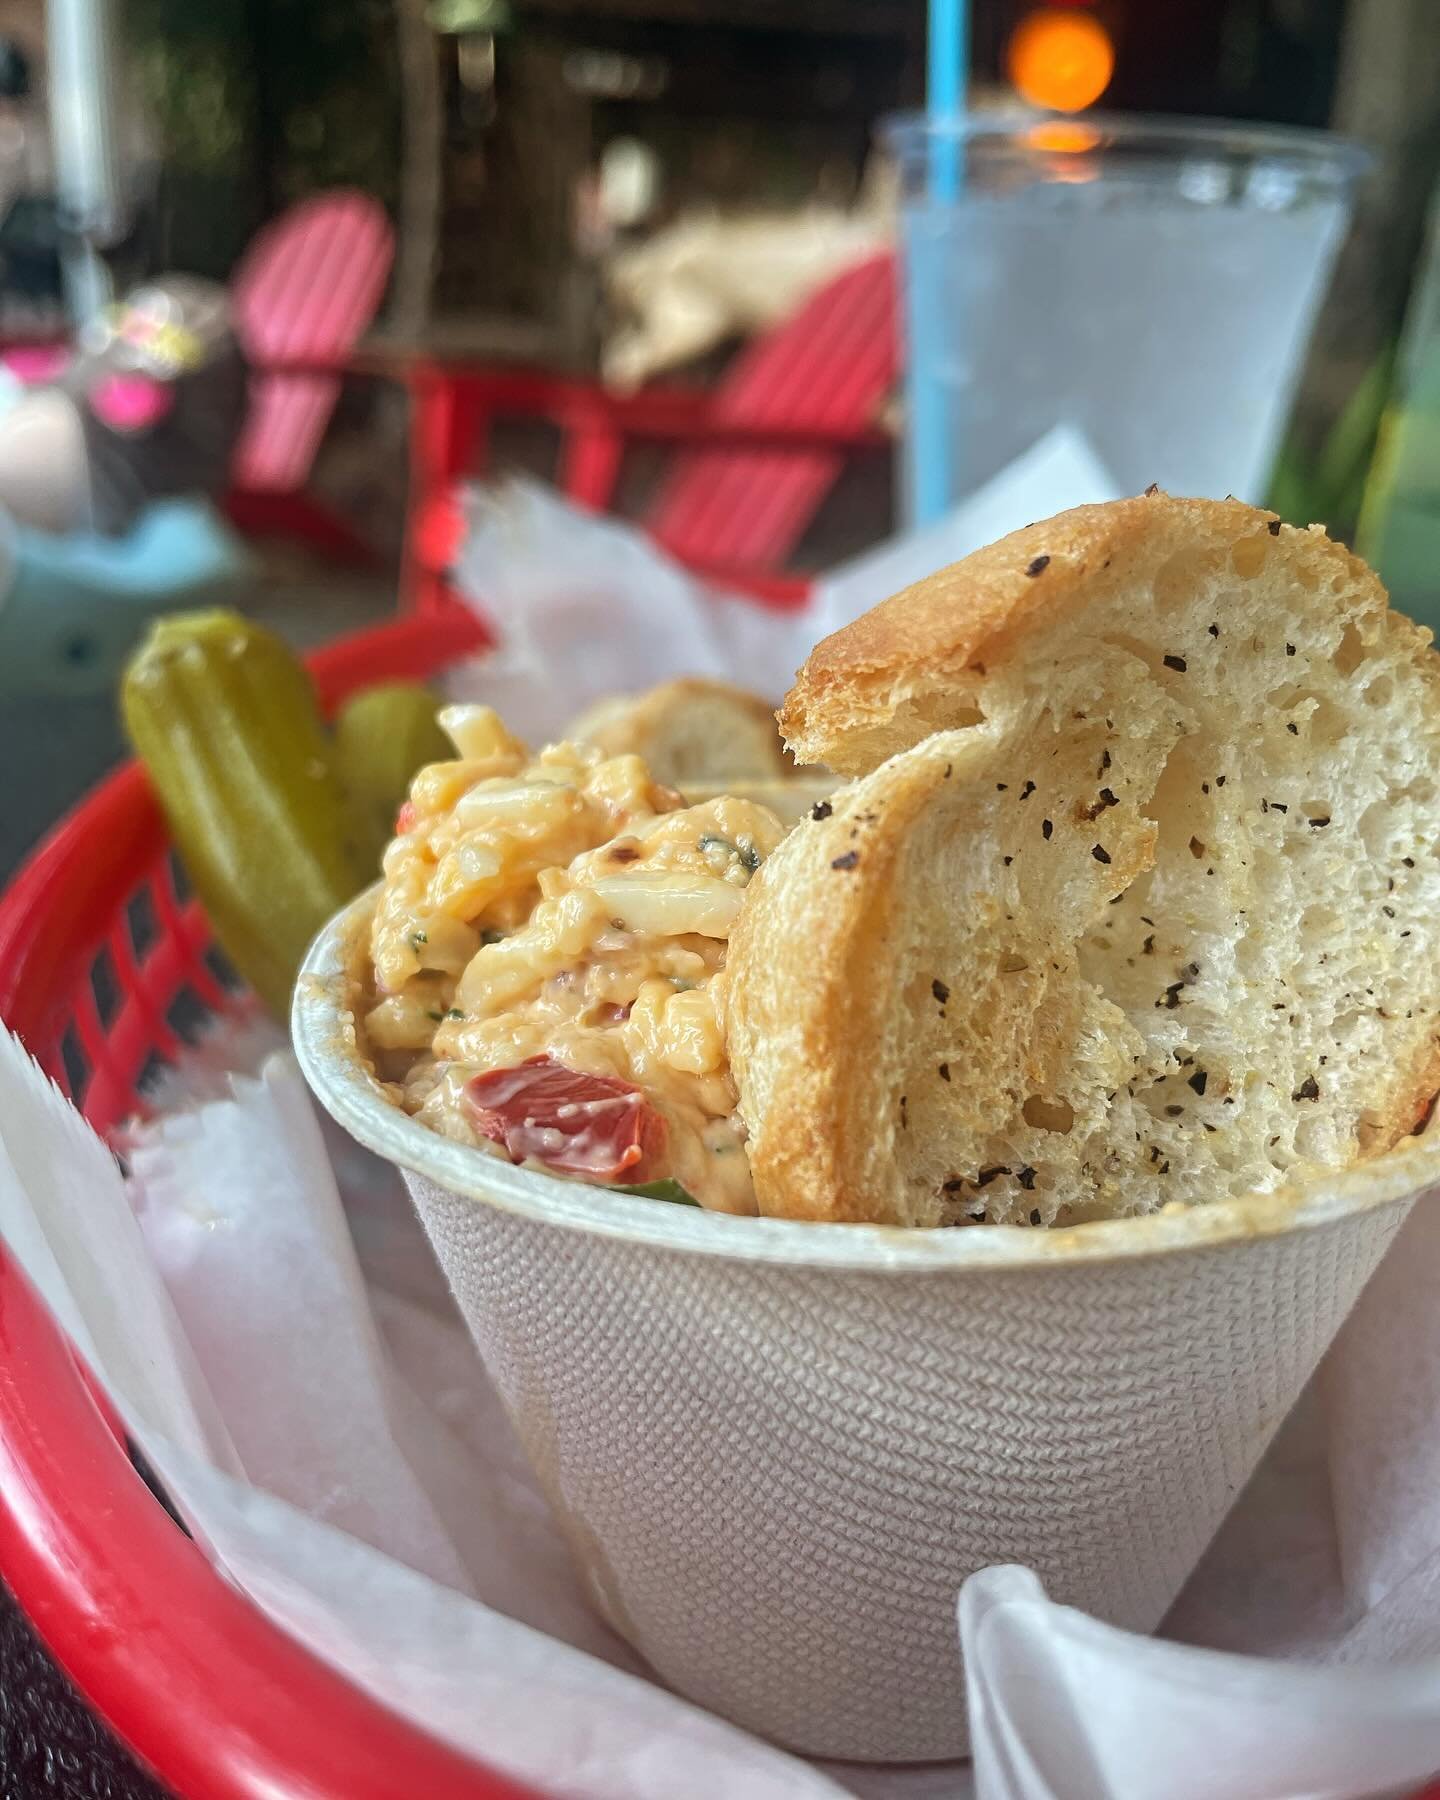 Have you tried our new menu item?! Sky&rsquo;s Pimiento Cheese, a little smoky, a little chipotle heat, served with toasted baguette and an okra spear 😋 Come hang with us for Fire &amp; Wine tonight from 6-9pm and give that pimiento cheese a try 💃
